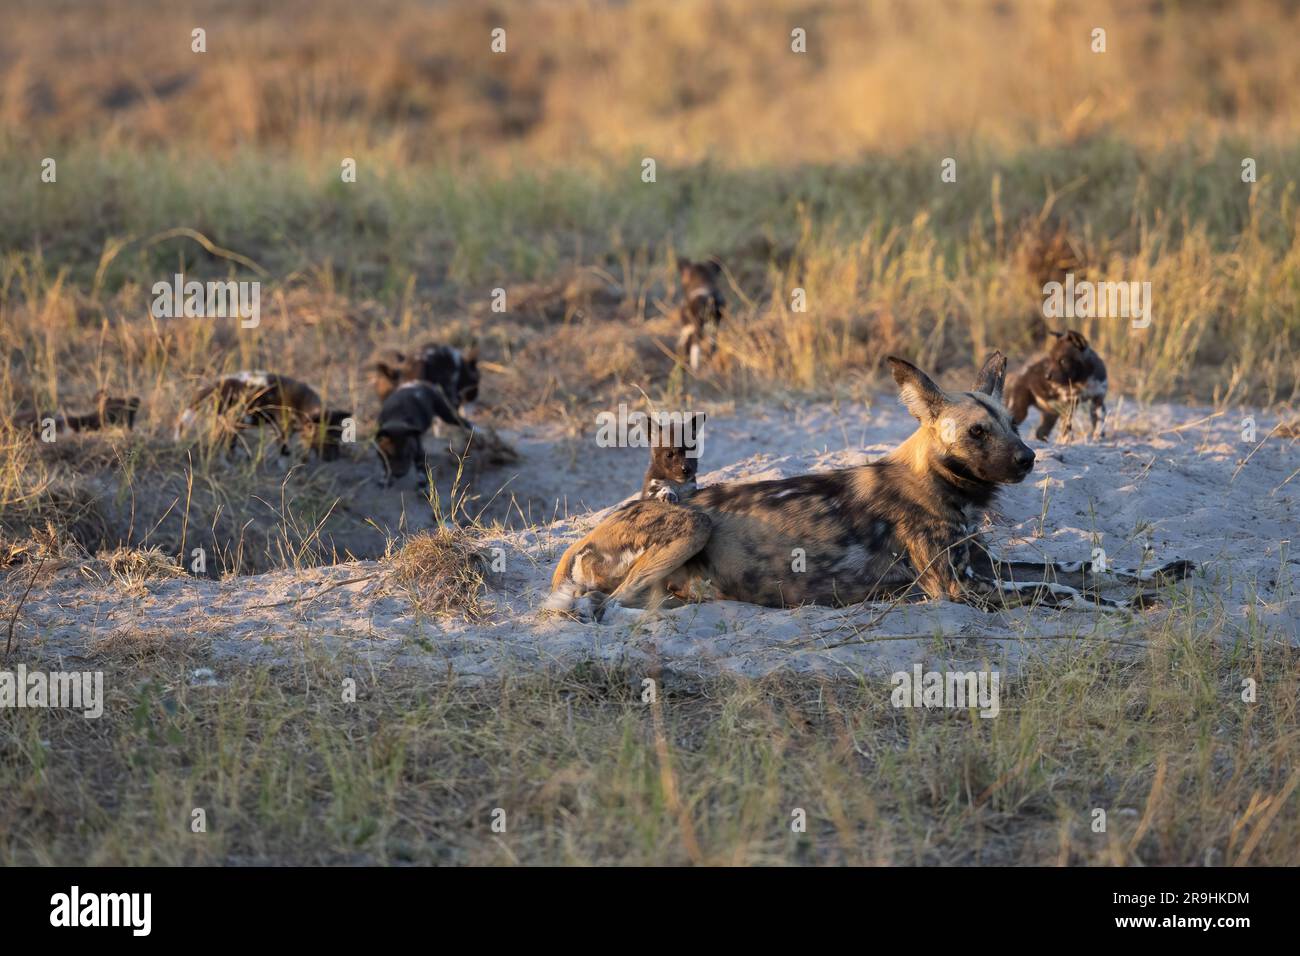 The alpha-female (African Wild Dog) with her young ones (puppies) in front of the den, Chobe National Park, Botswana, Southern Africa Stock Photo